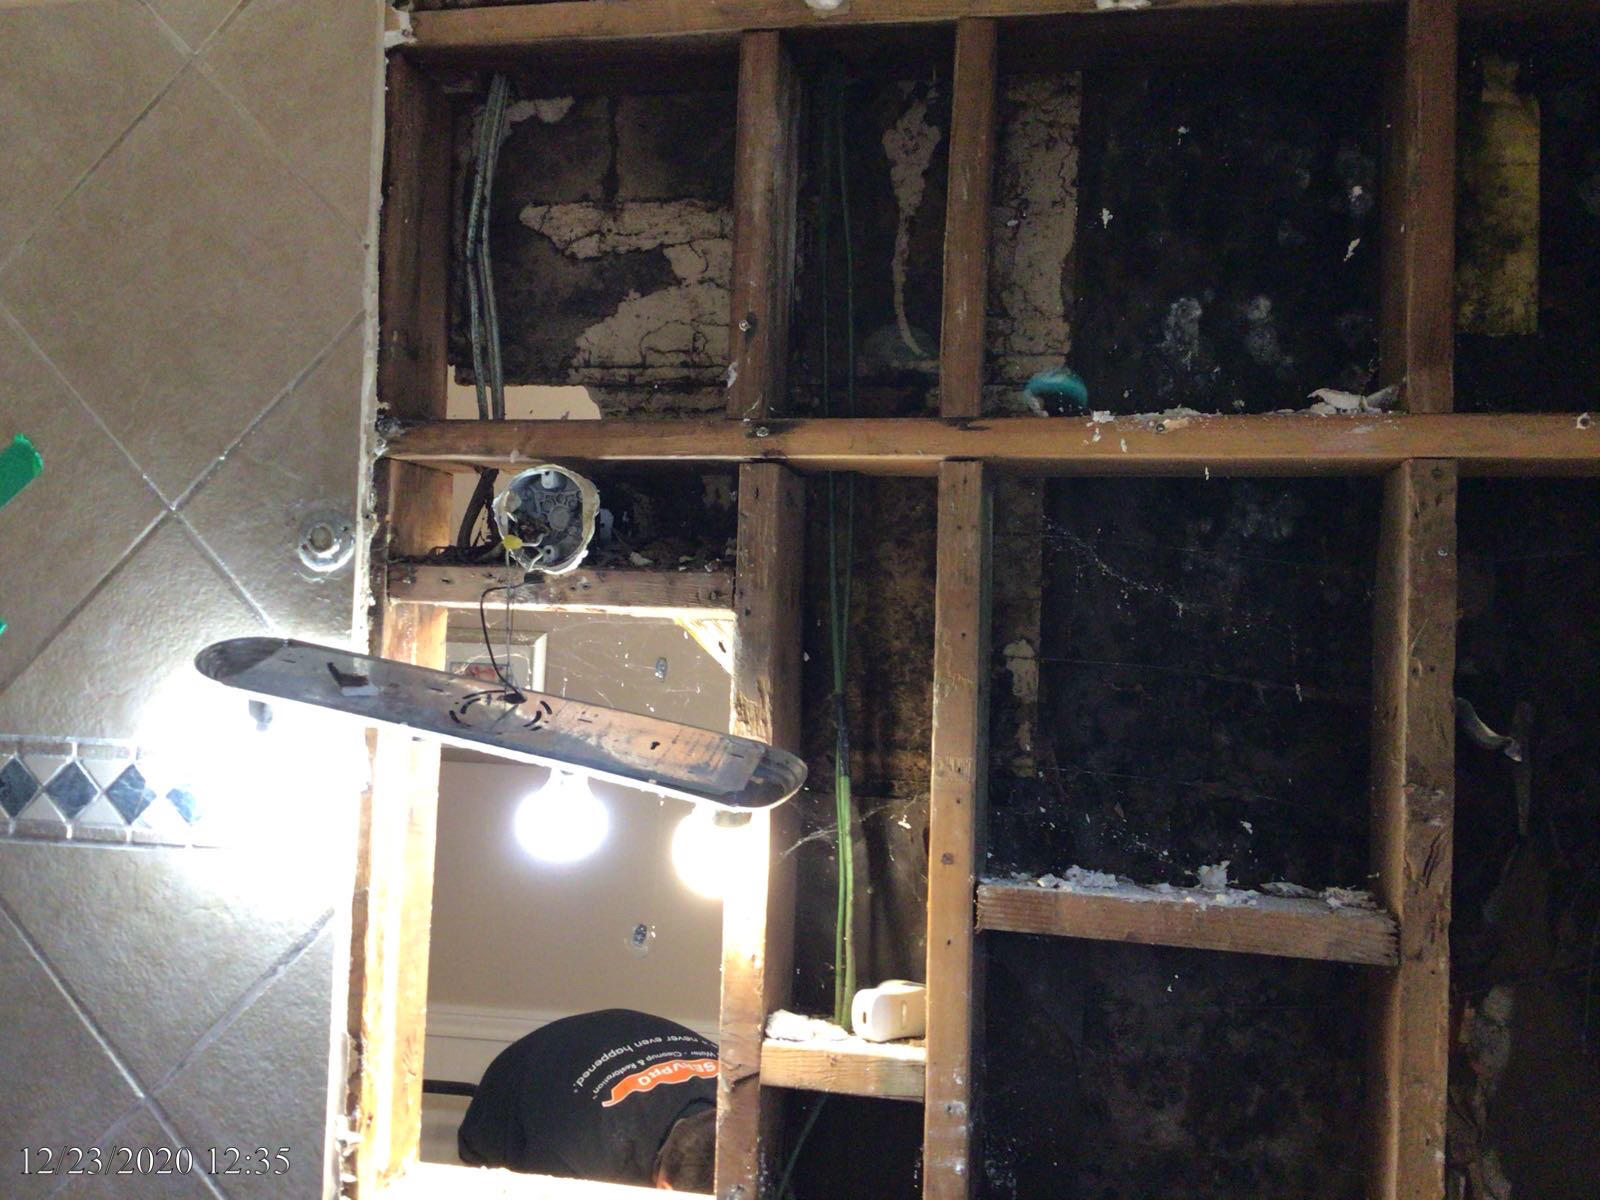 Water damage can quickly lead to mold in your bathroom if not remediated quickly.